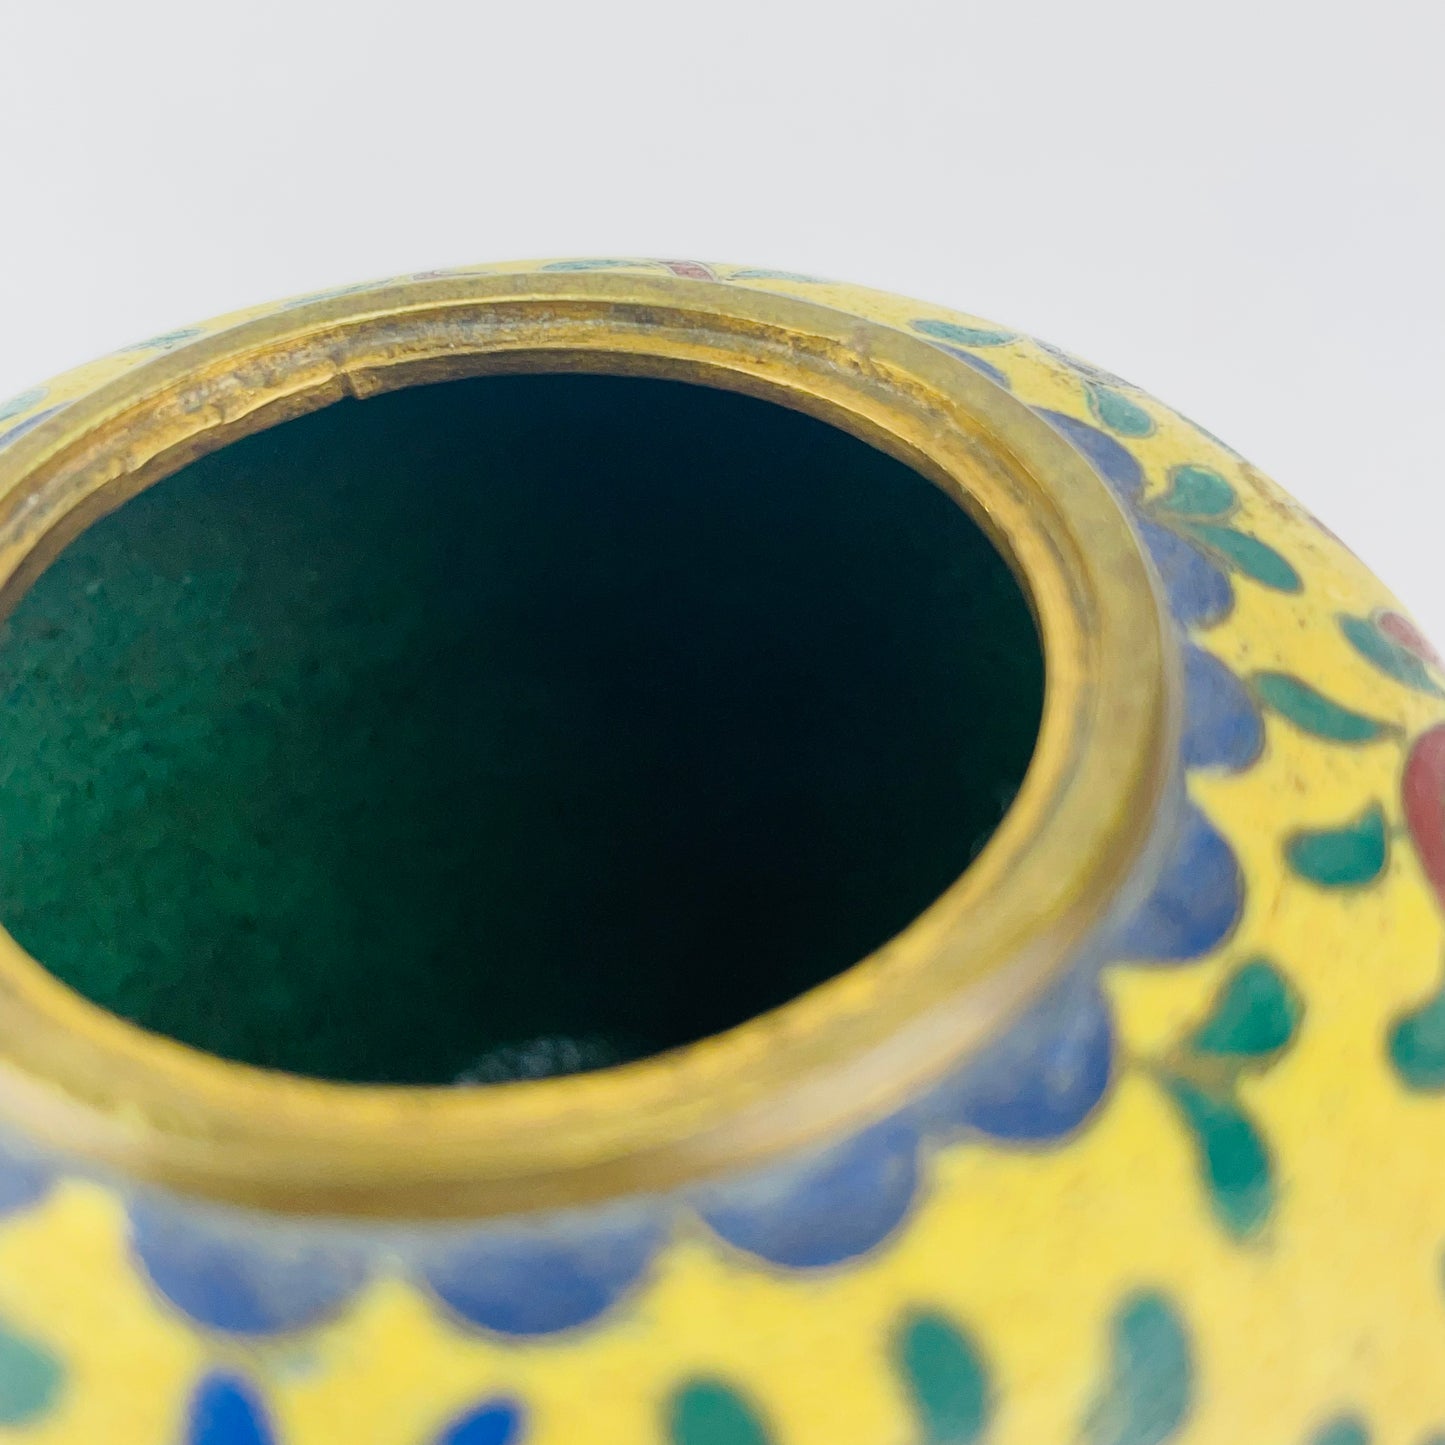 Antique Chinese Yellow Cloisonné Koro Censer for Incense 3”